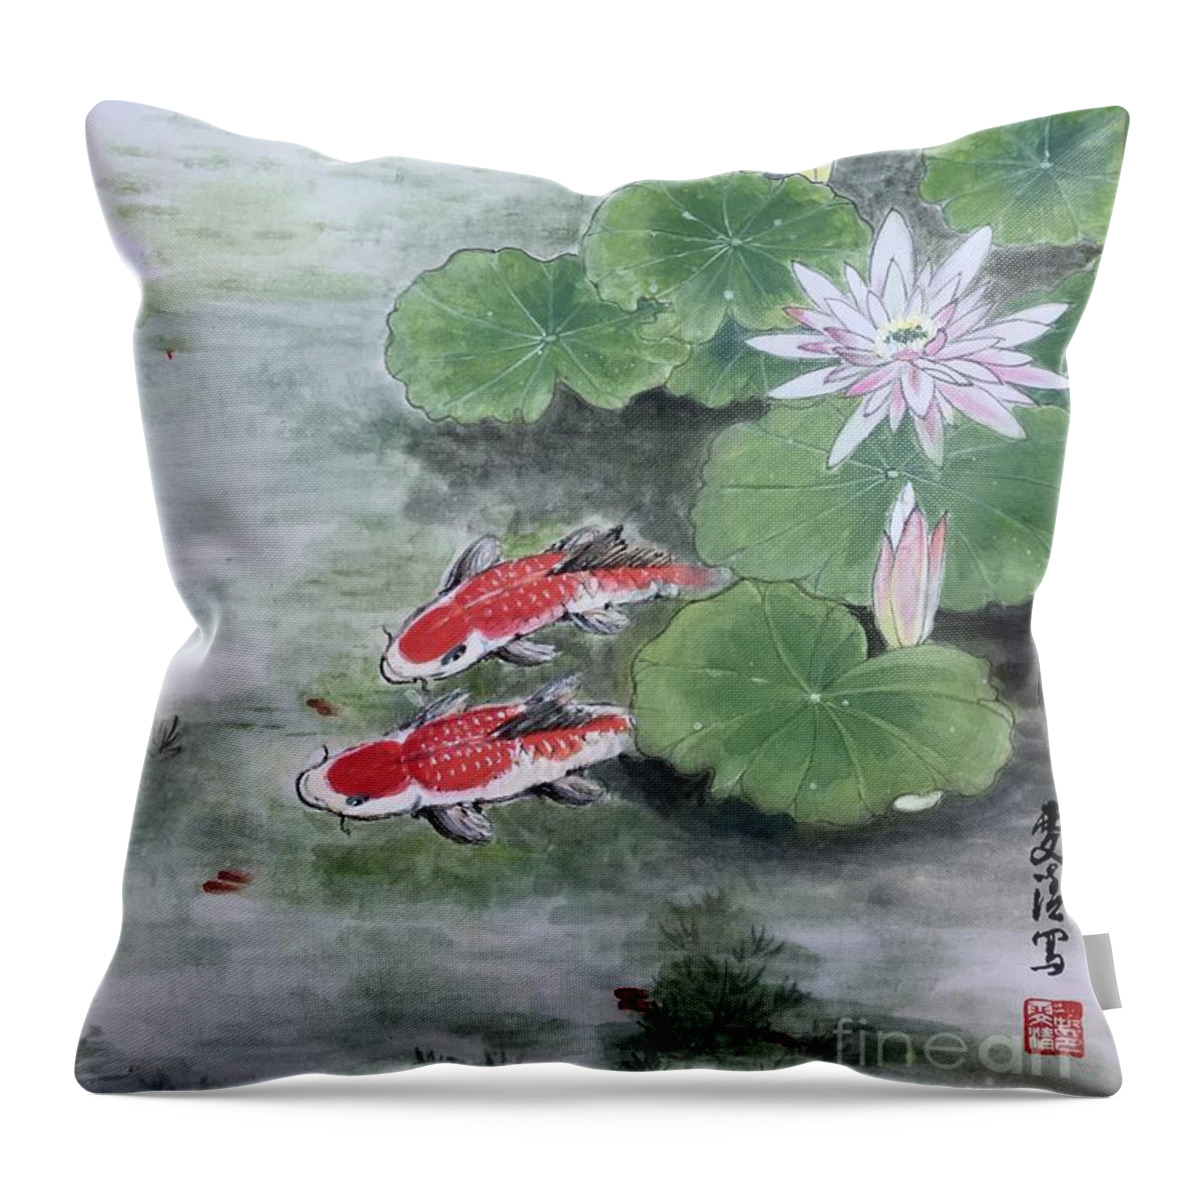 Lake Throw Pillow featuring the painting Fishes Joy - 2 by Carmen Lam